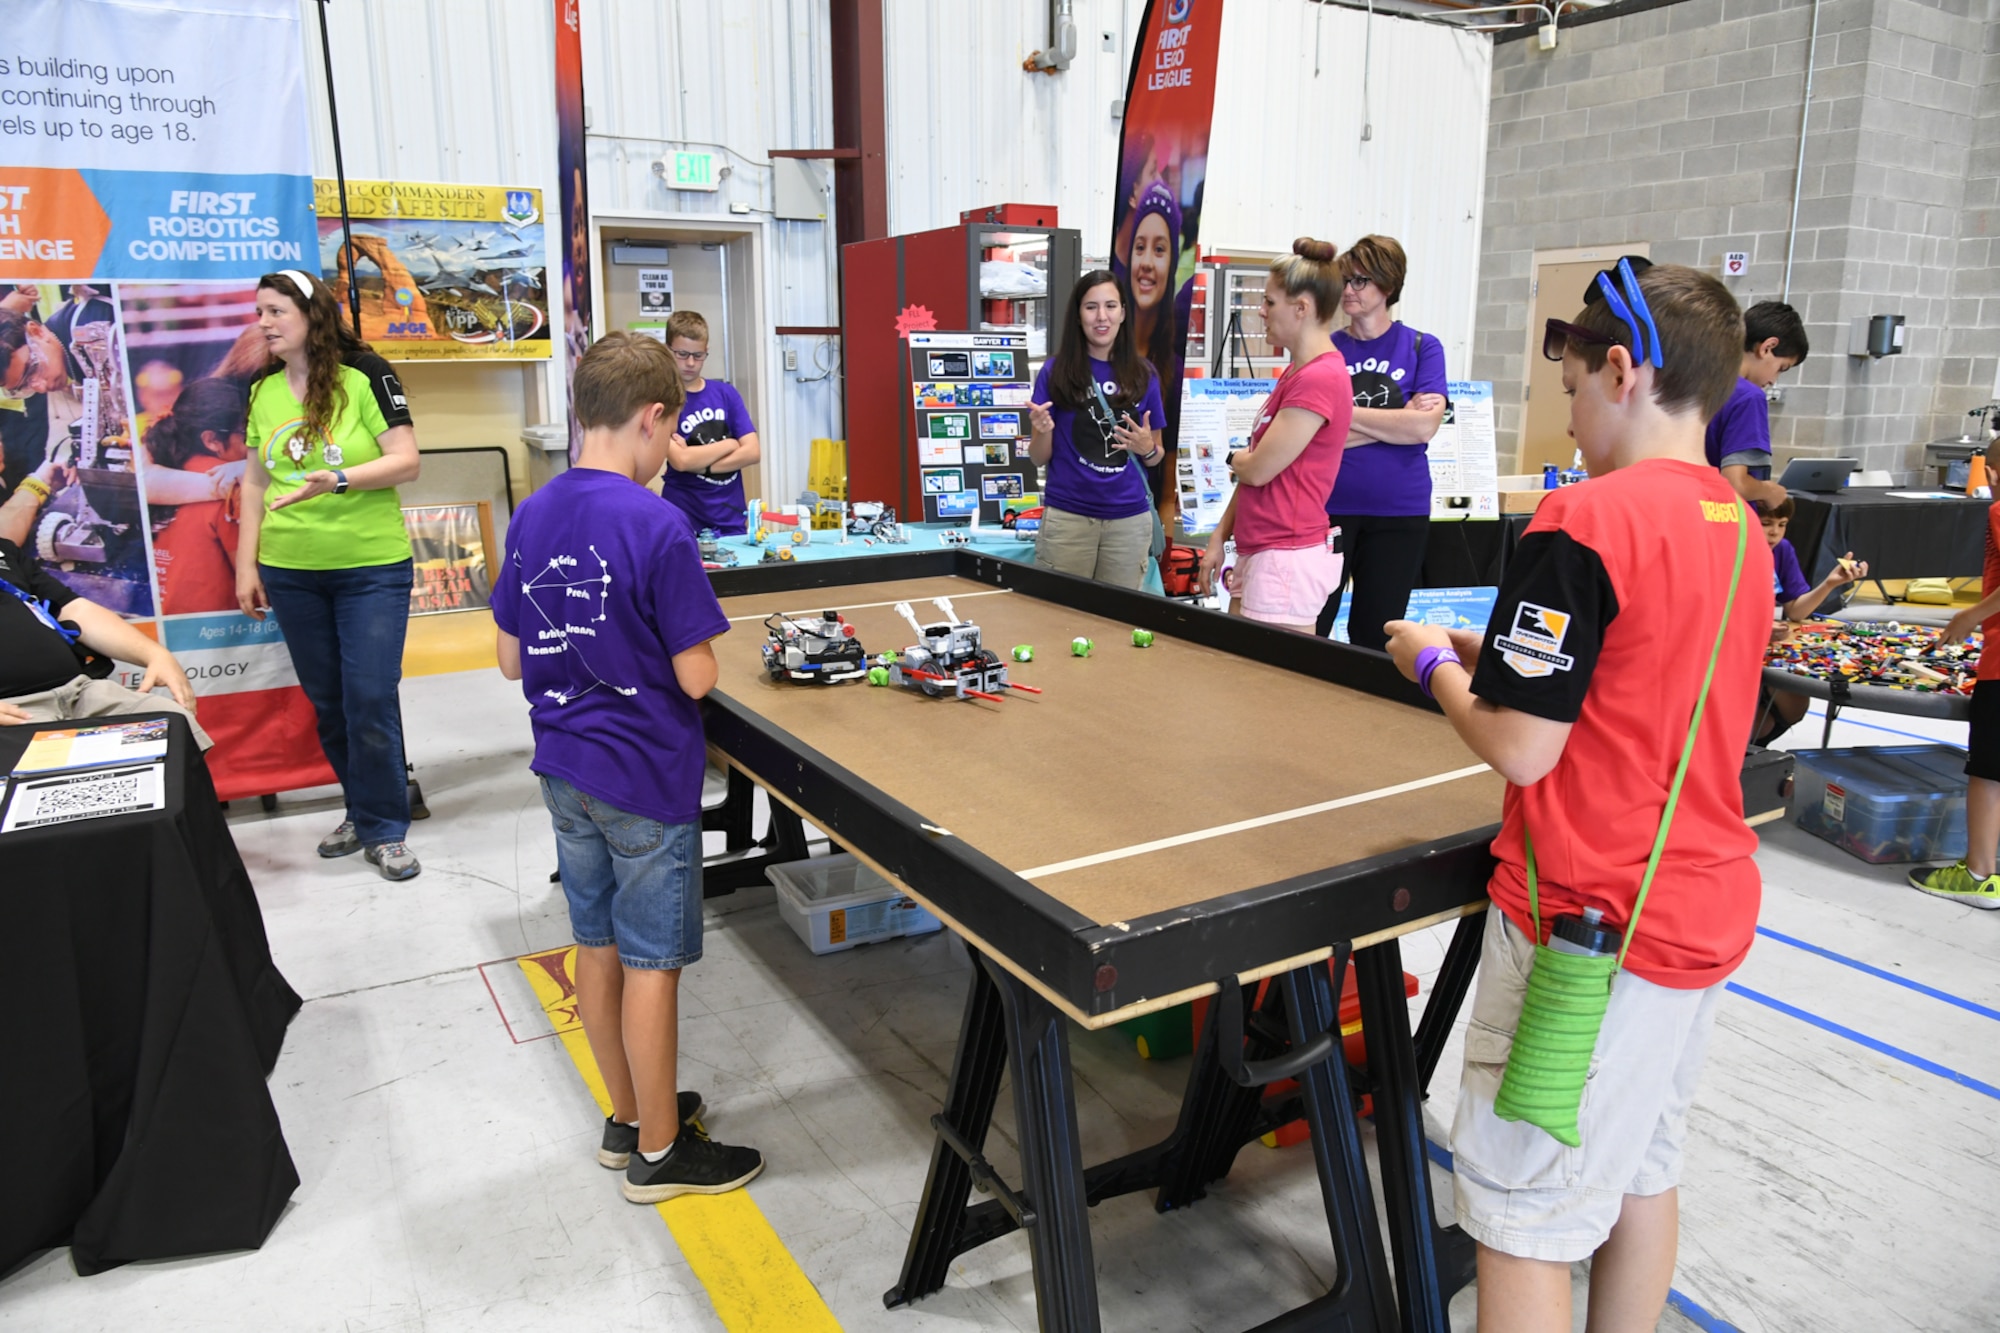 STEM City, a popular attraction at Hill’s 2018 show, offers an entire hangar filled with interactive exhibits, including giant video games, drones, robots, virtual reality, welding simulators, rocket launching and much more.